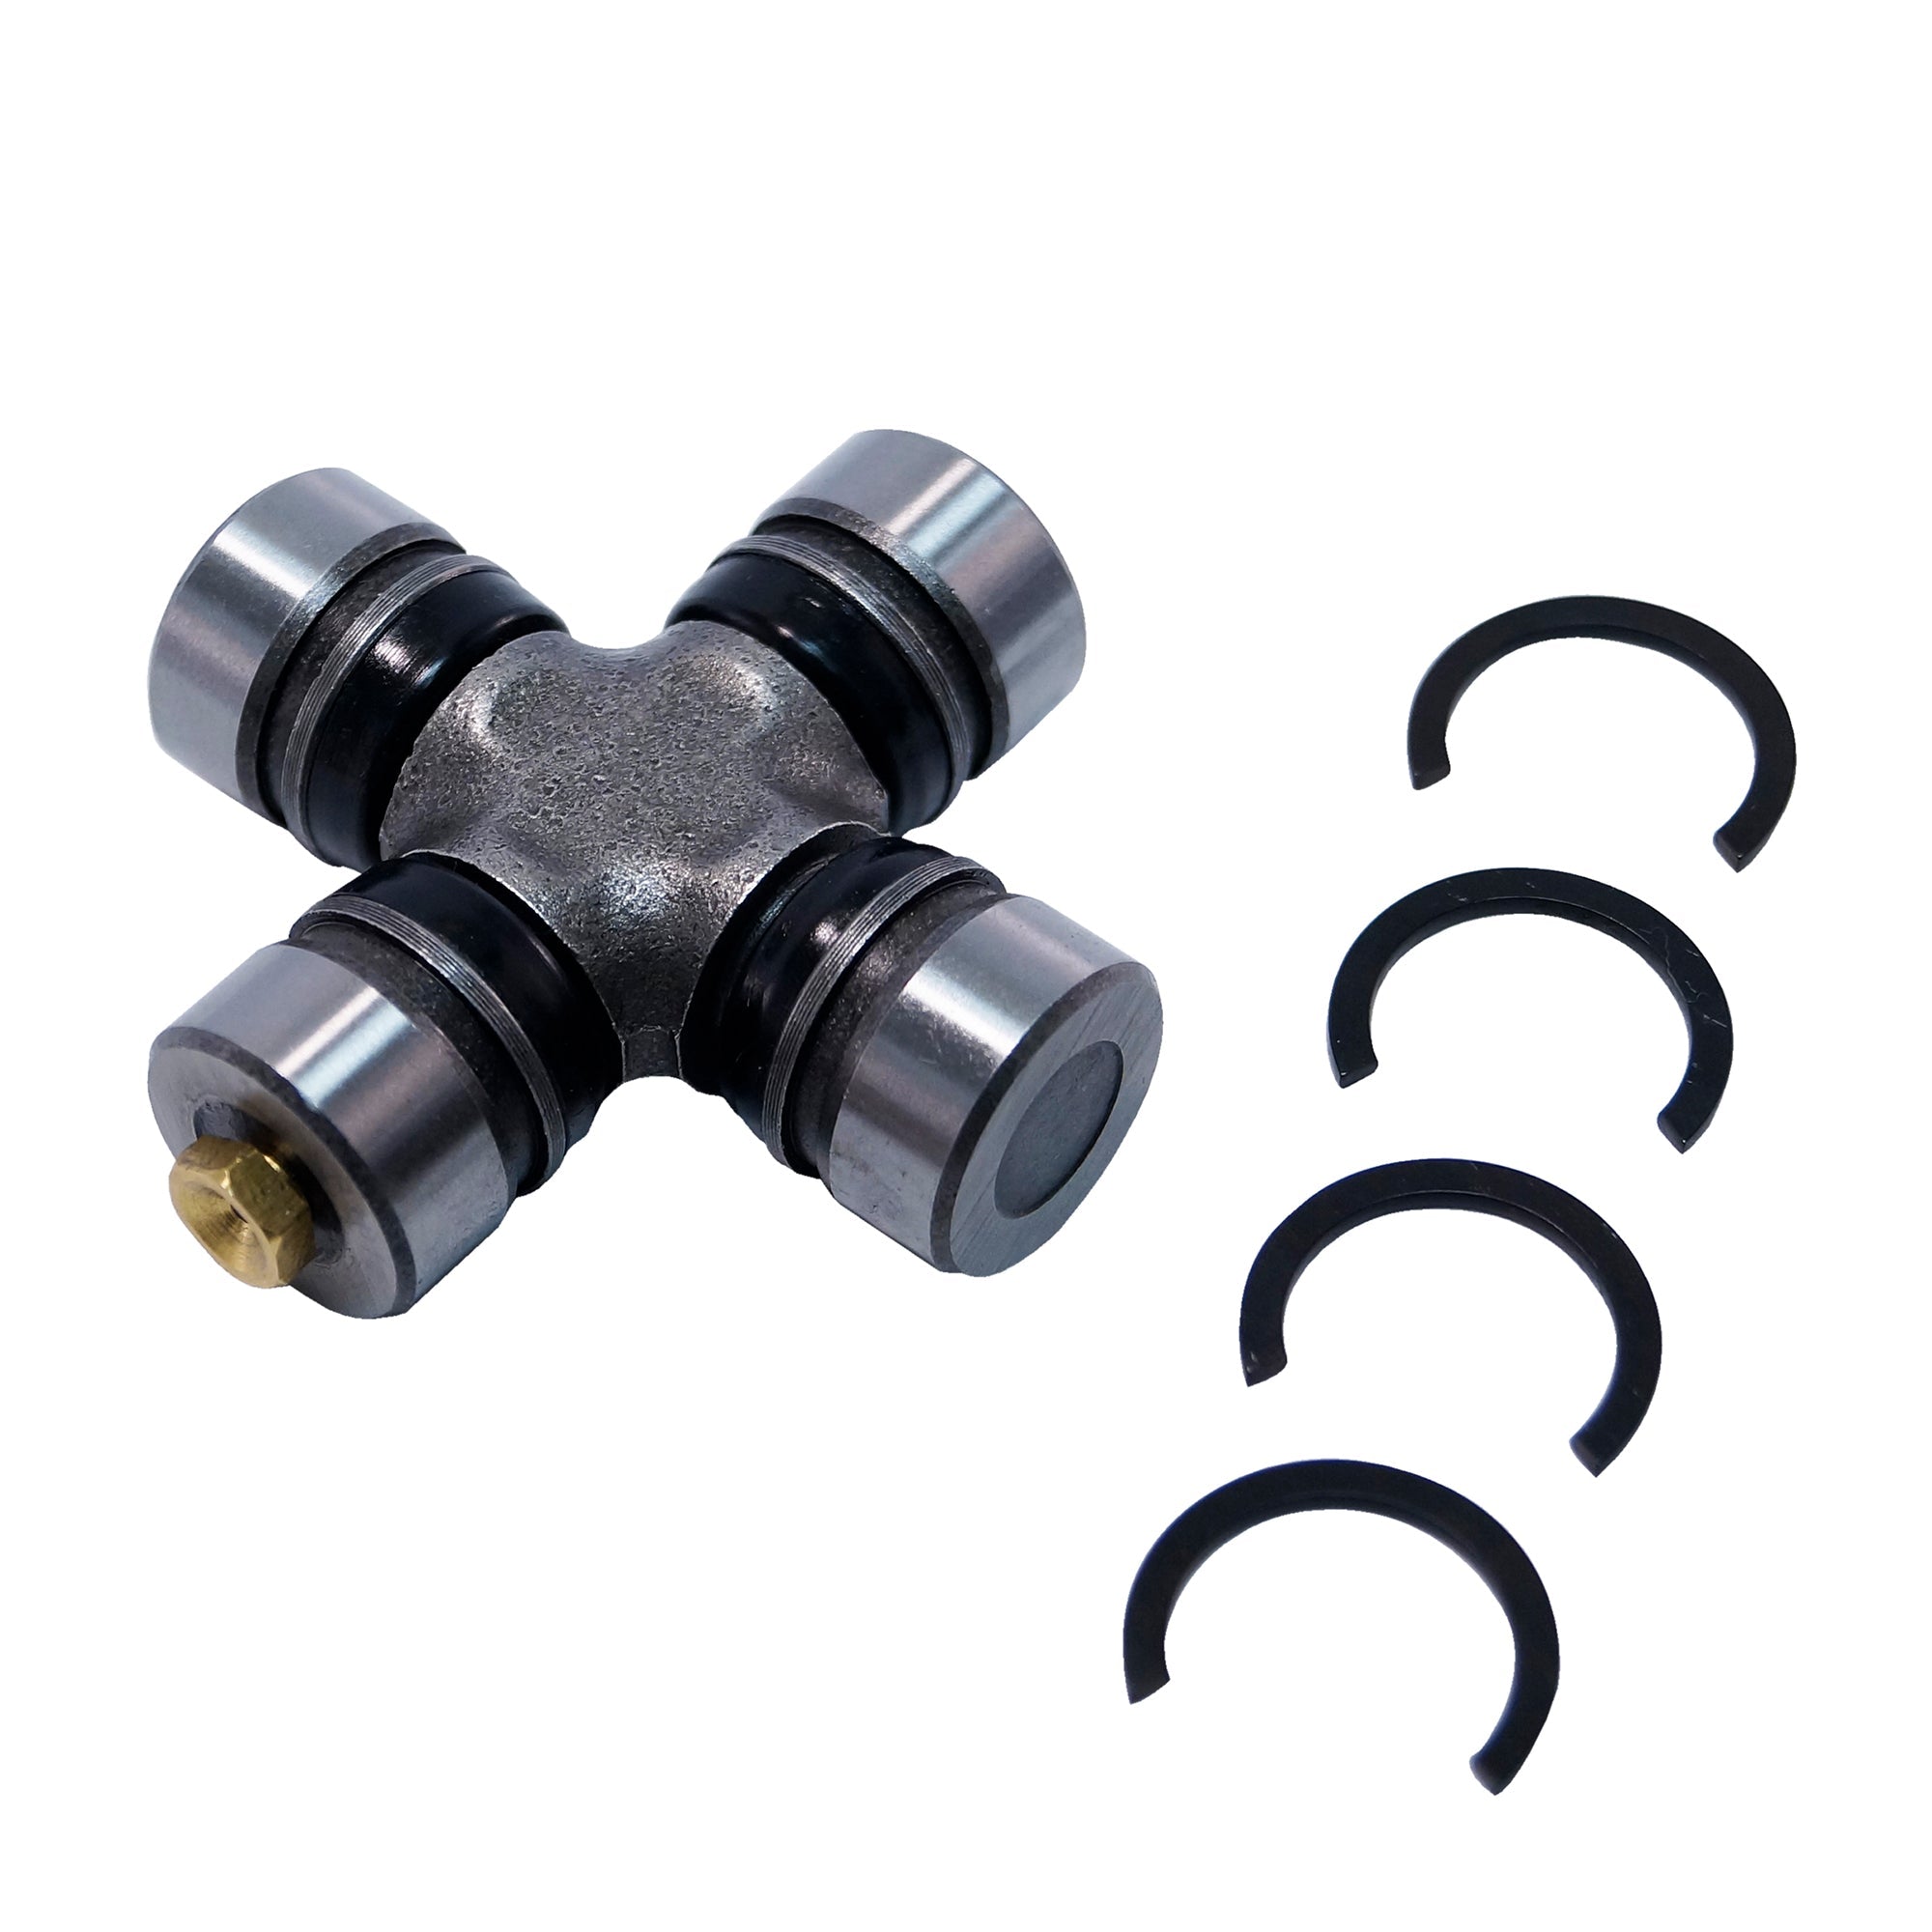 Universal Joint for Polaris Xpedition 425 